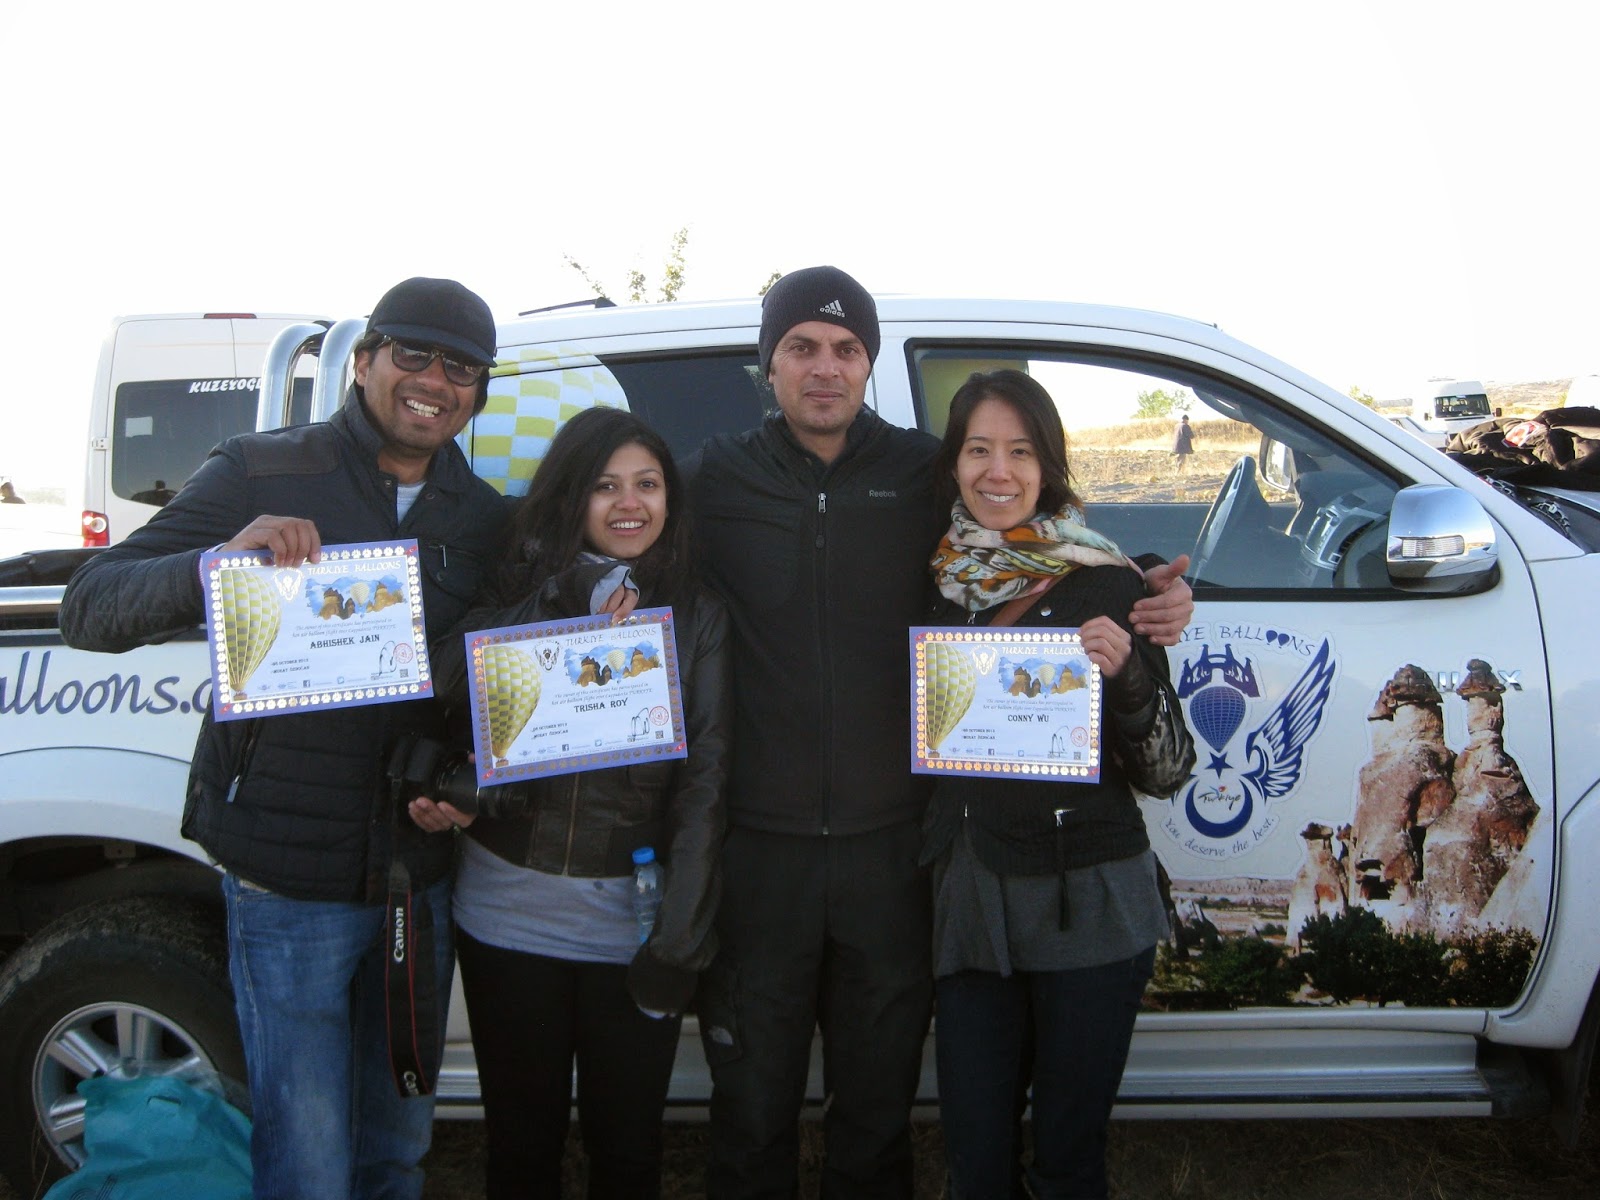 Cappadocia - We proudly show off our certificates